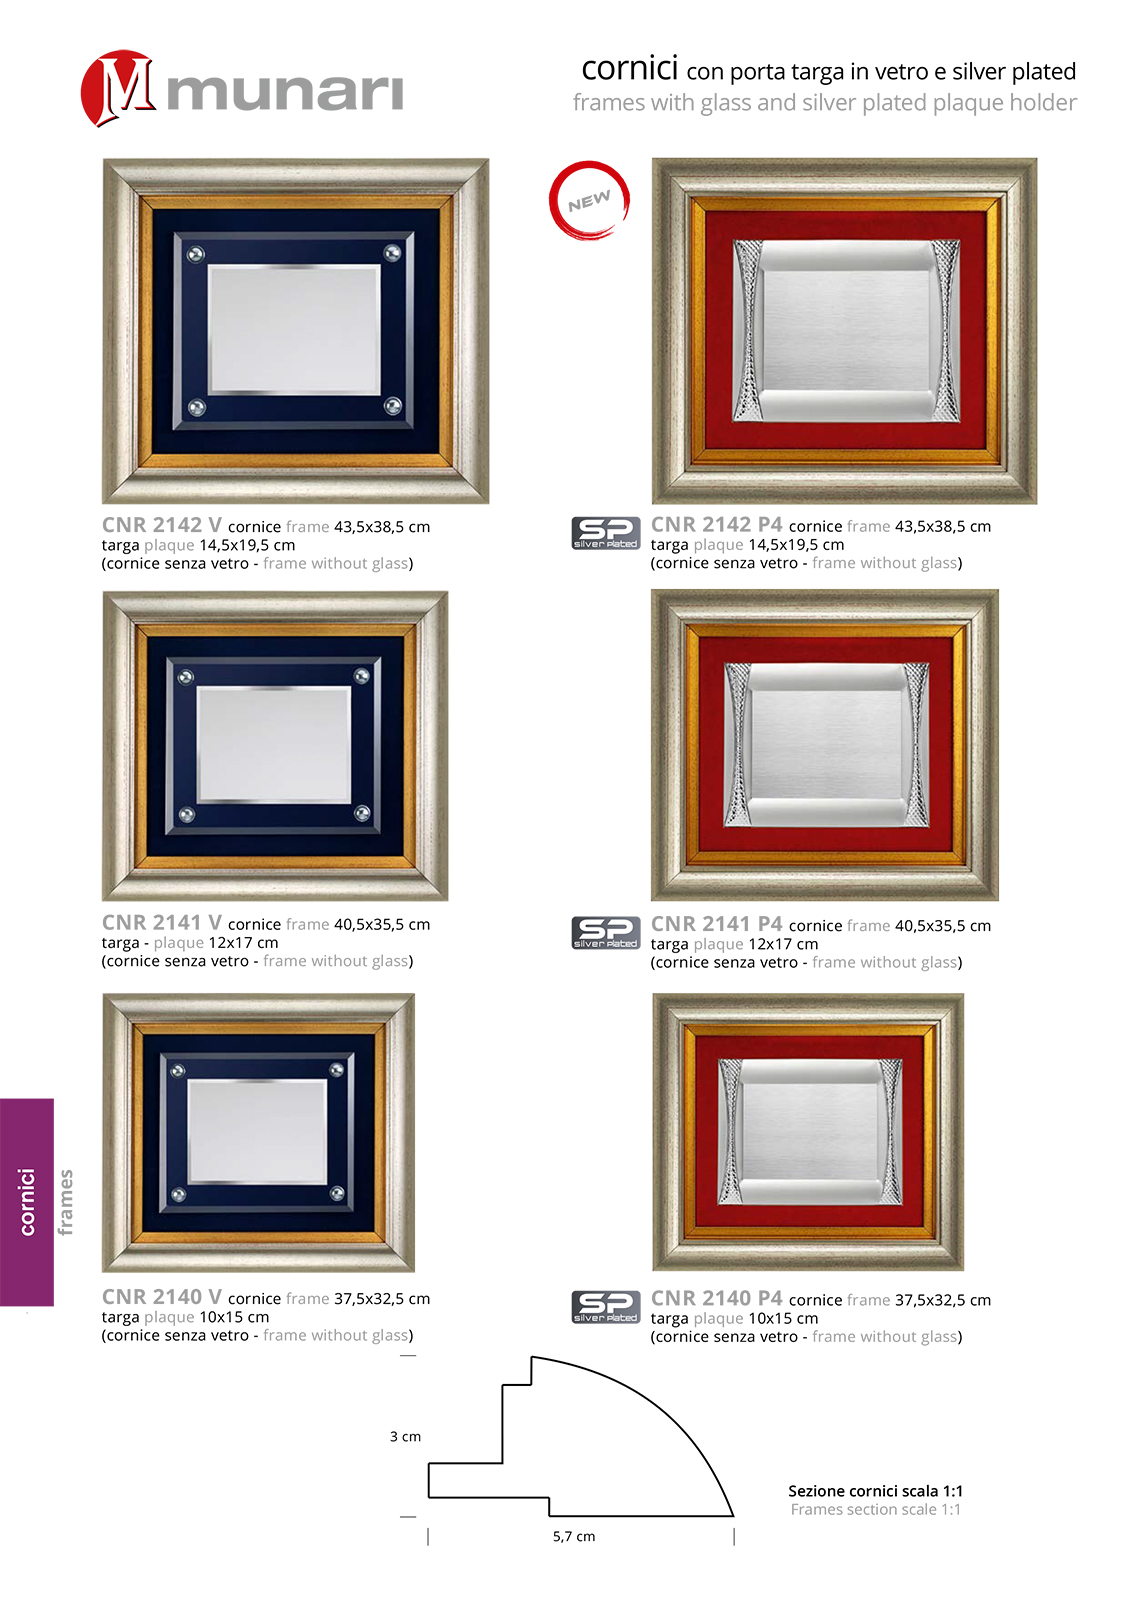 PVC frames with silver plated plaque series CNR 2140 P4